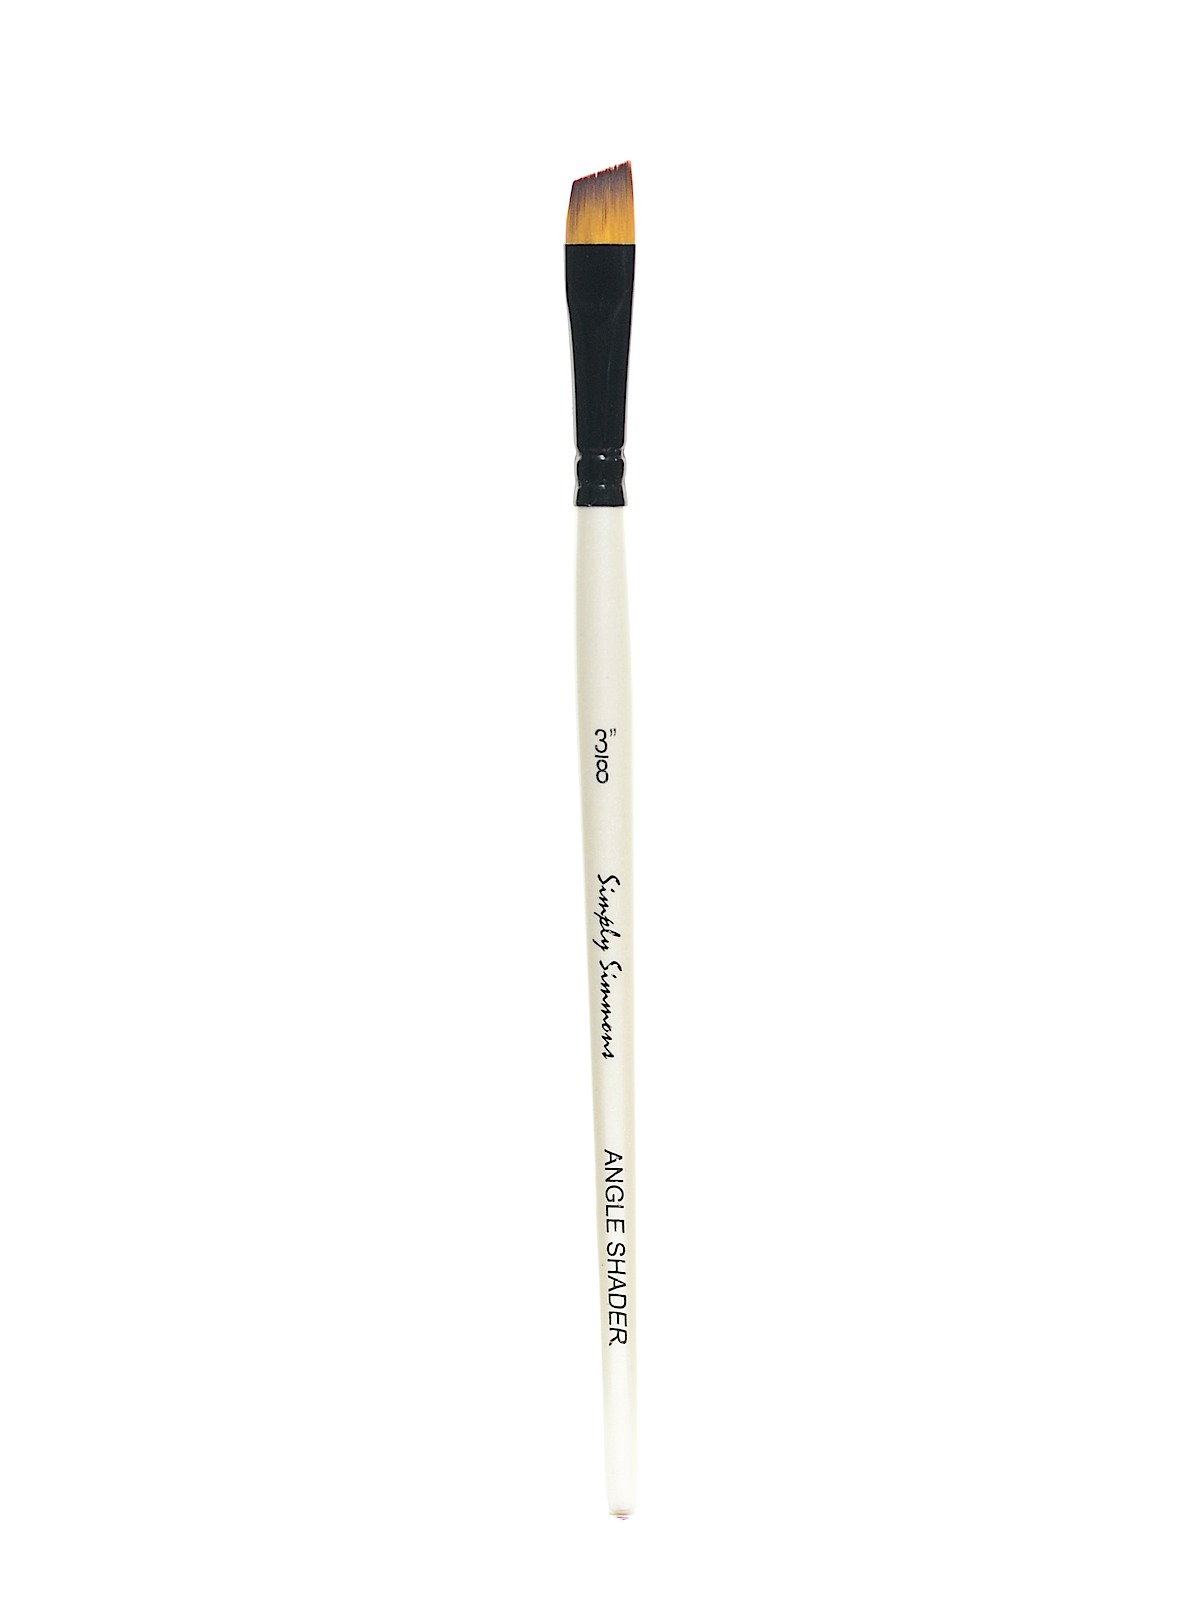 Simply Simmons Short Handle Brushes Angle Shader 3 8 In.